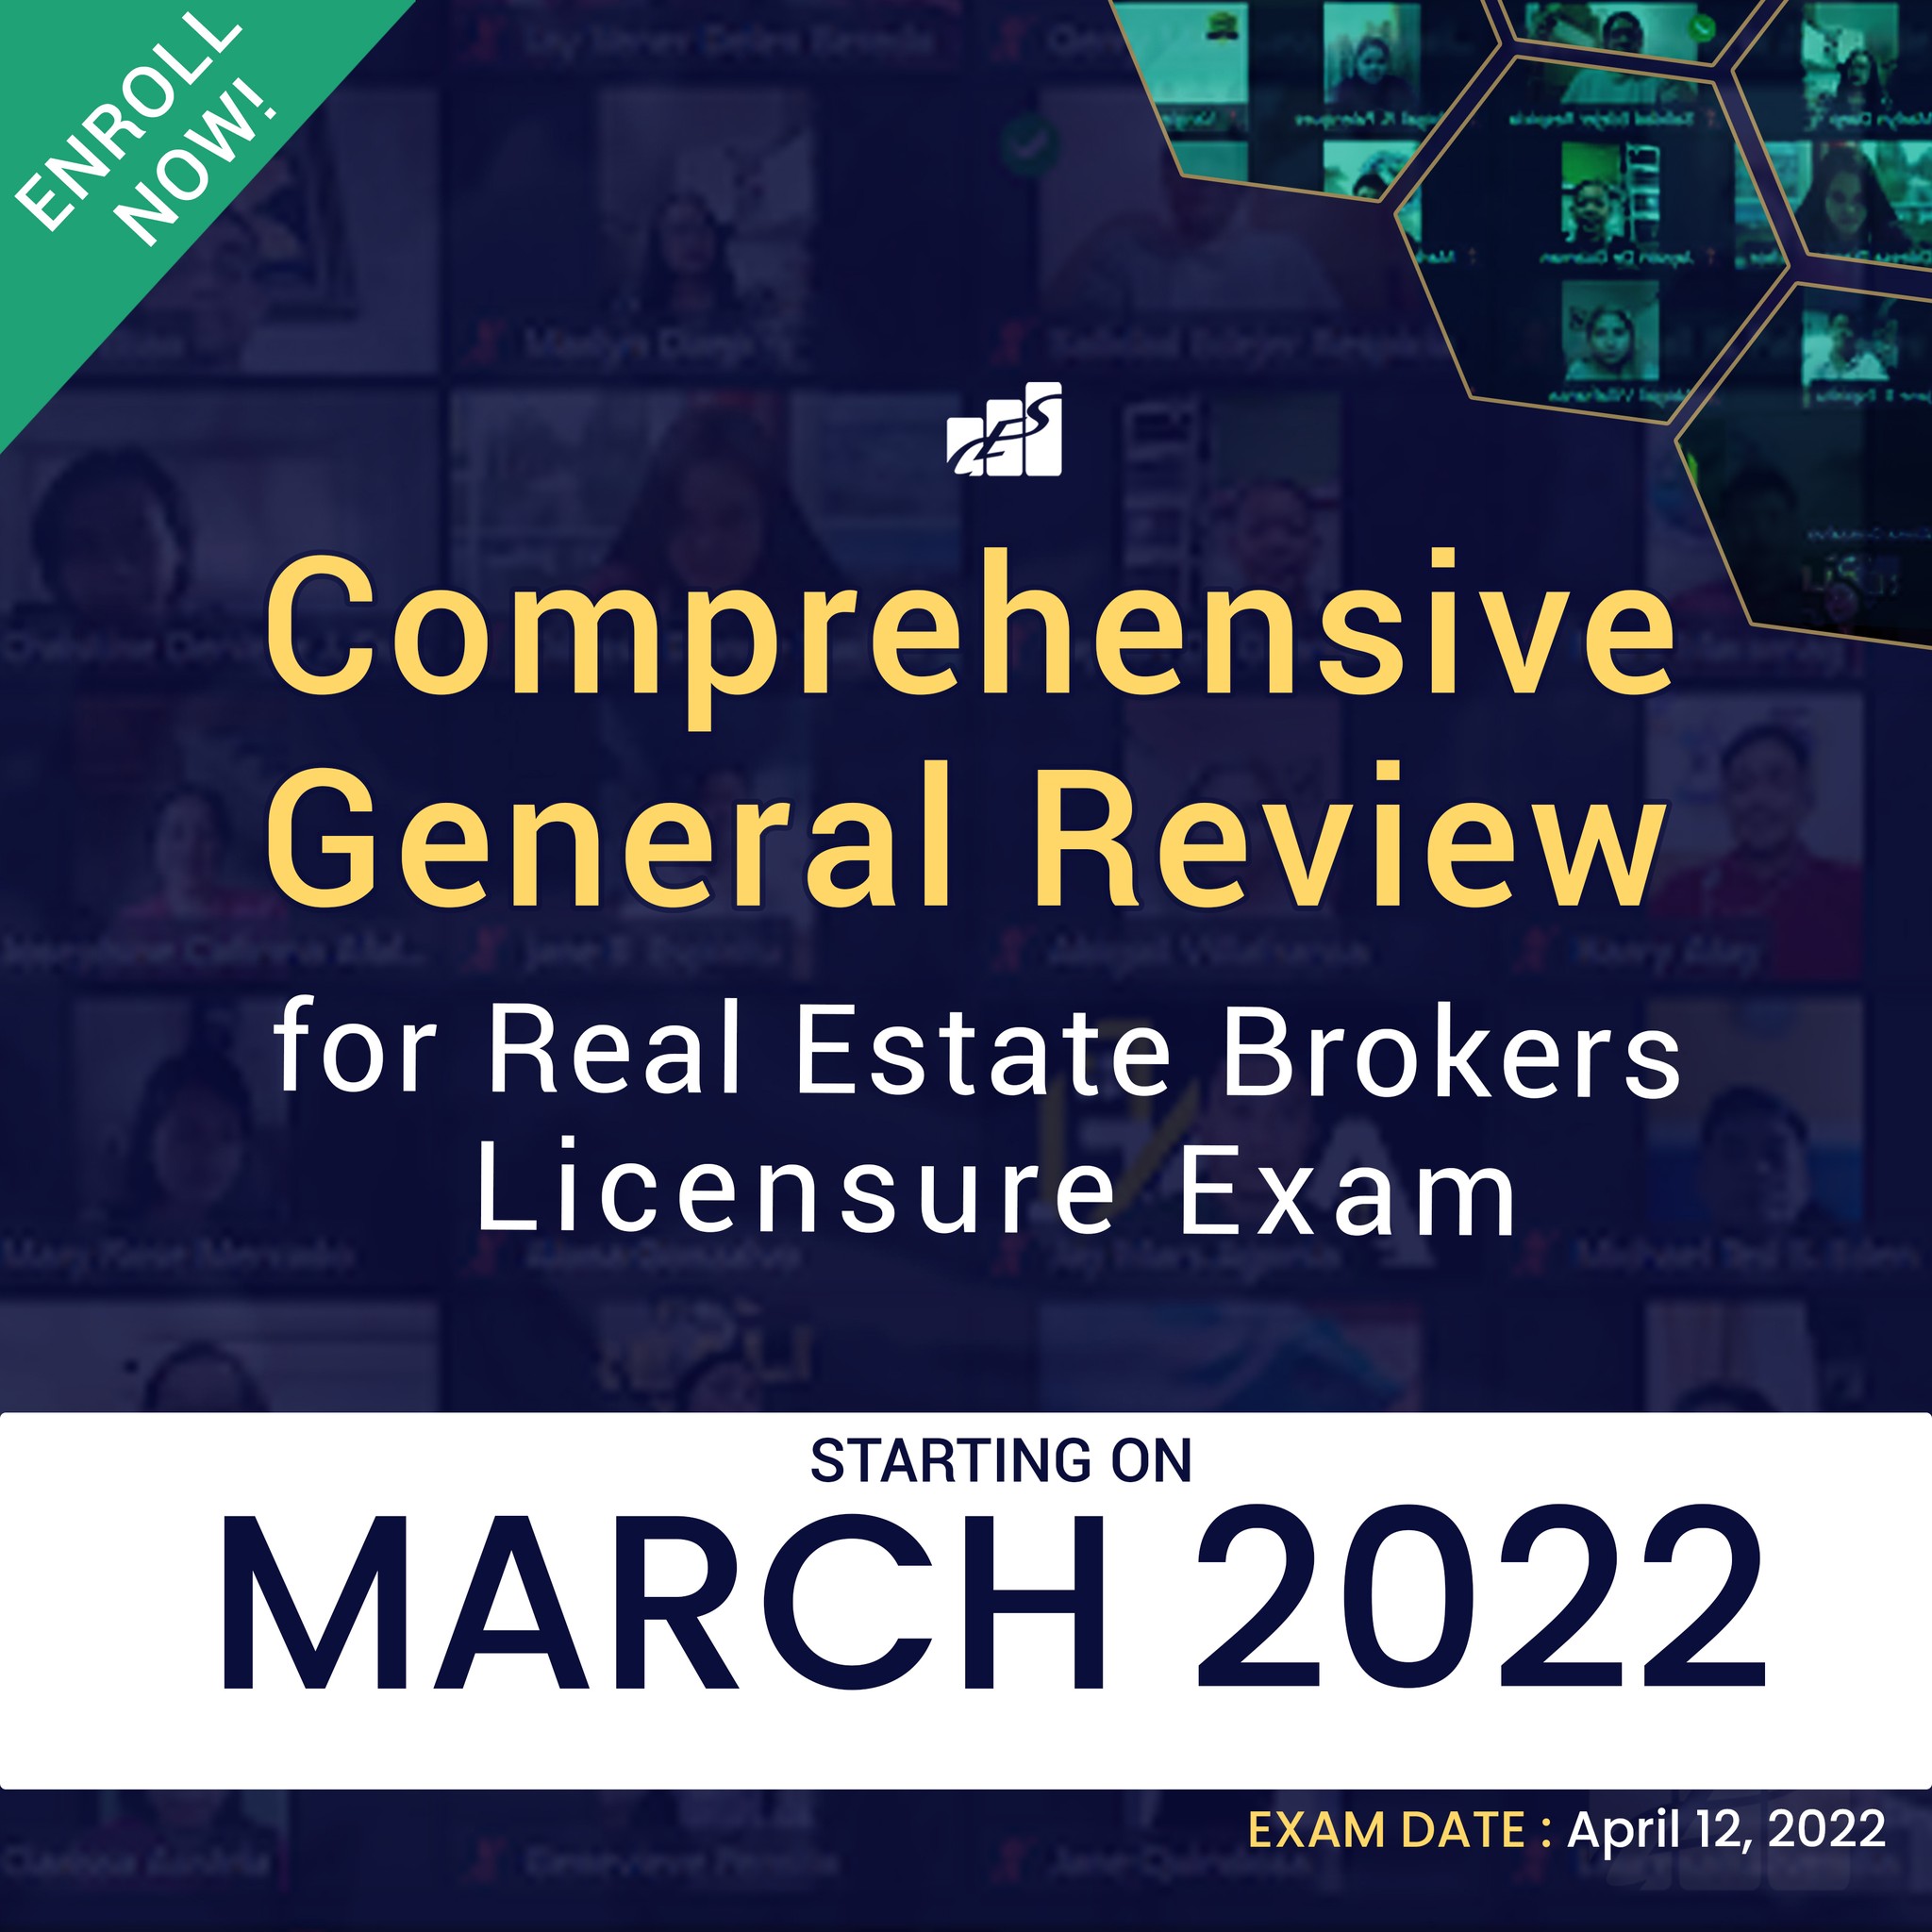 Real Estate Brokers Review for Licensure Exam 2022